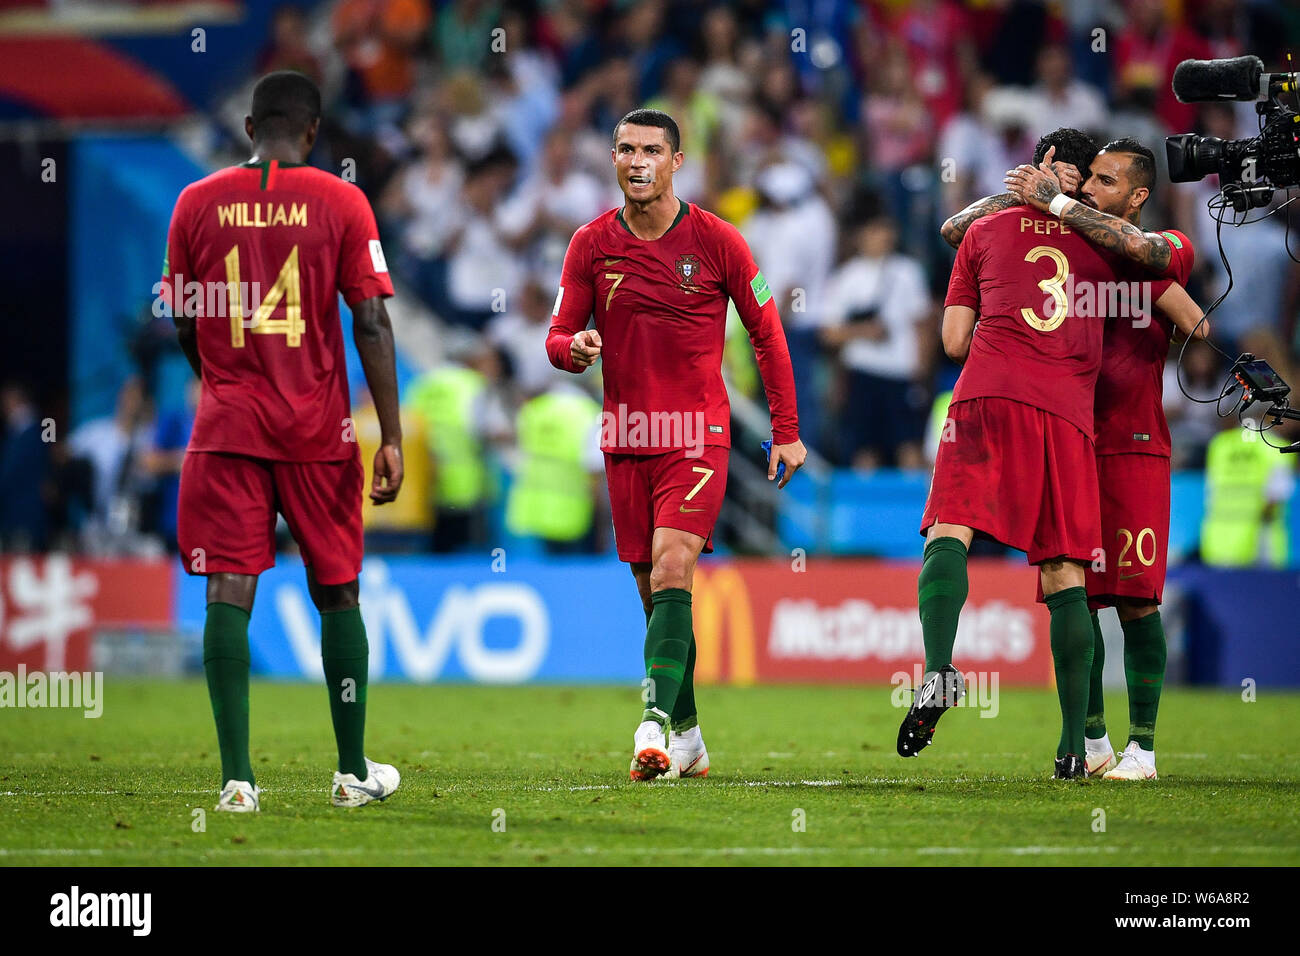 Cristiano Ronaldo, center, of Portugal interacts with his teammate William Carvalho after playing a draw against Spain in their Group B match during t Stock Photo